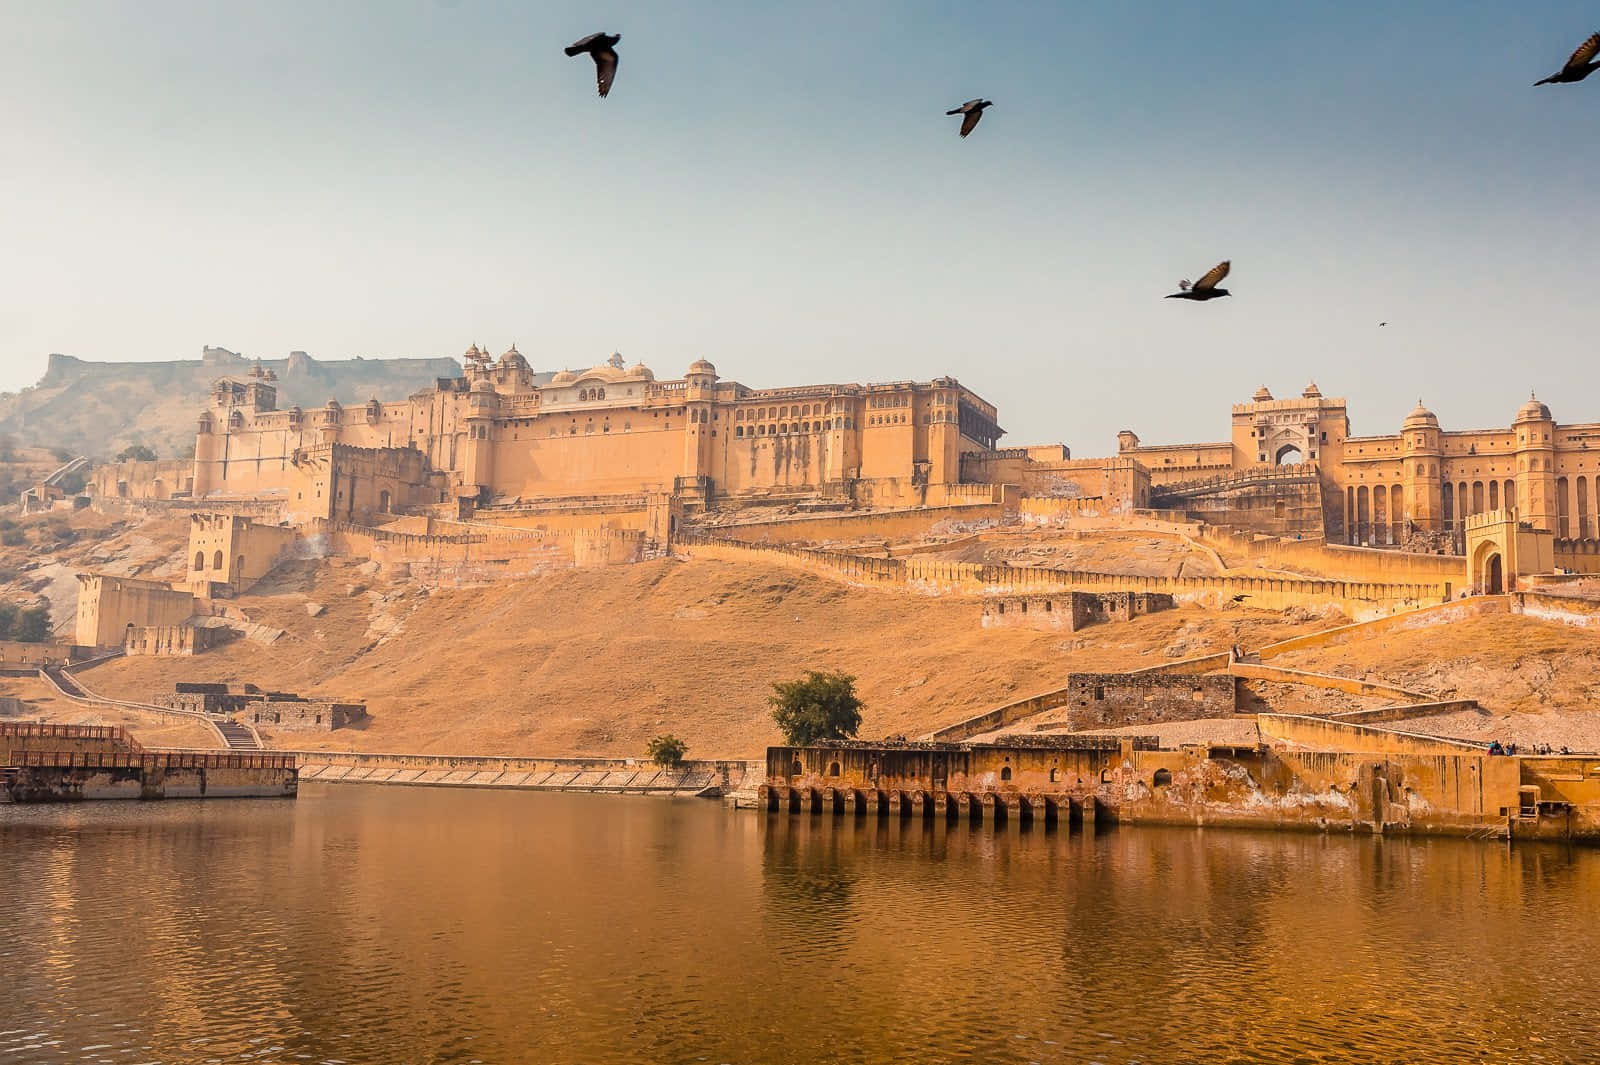 Photograph Of The Buildings In Amer Fort Wallpaper